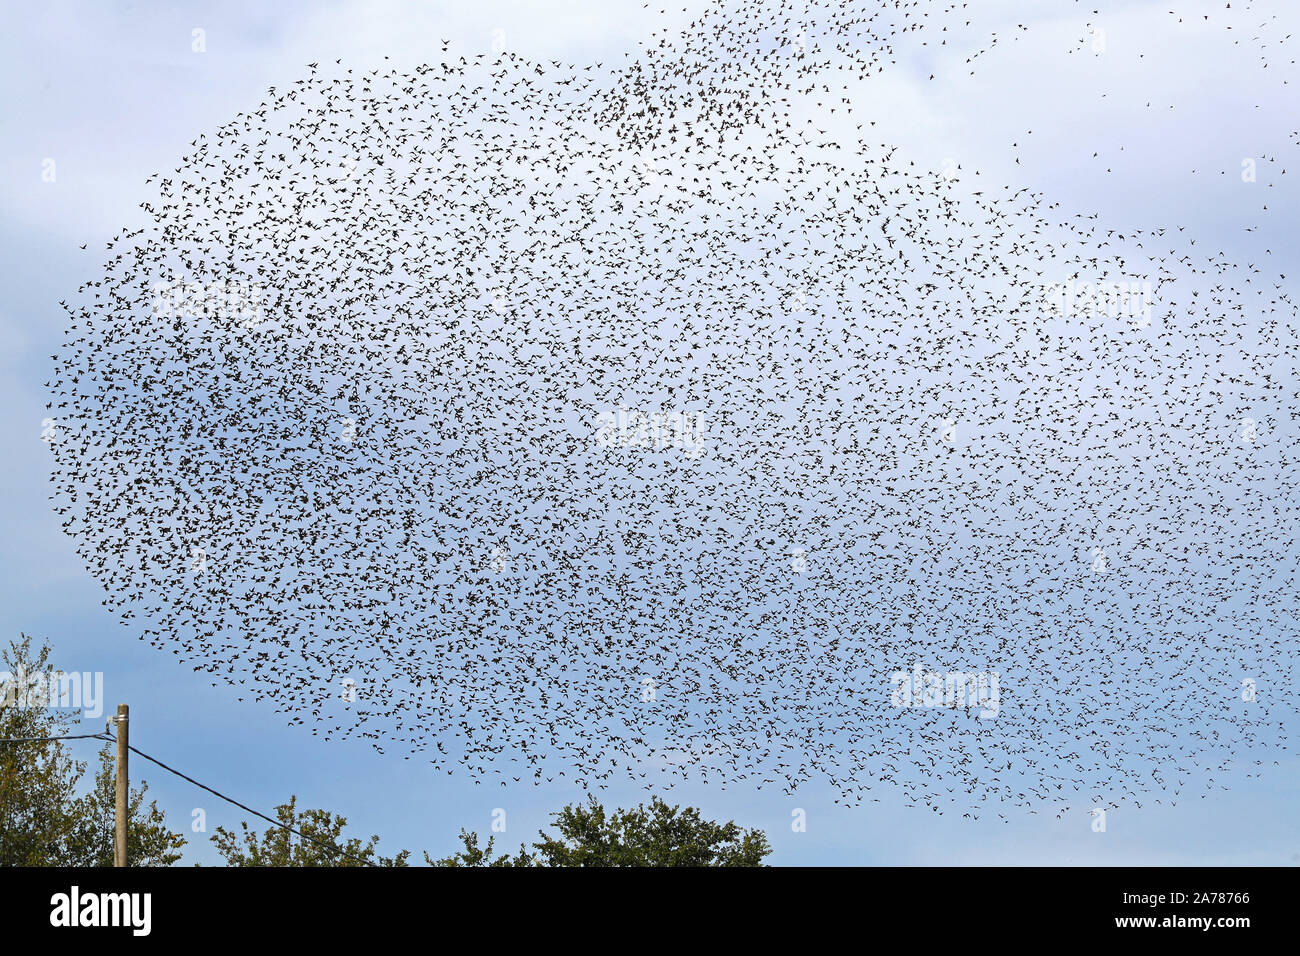 a large flock or murmuration of starlings flocking together and flying in formation above a field in rural Italy Stock Photo